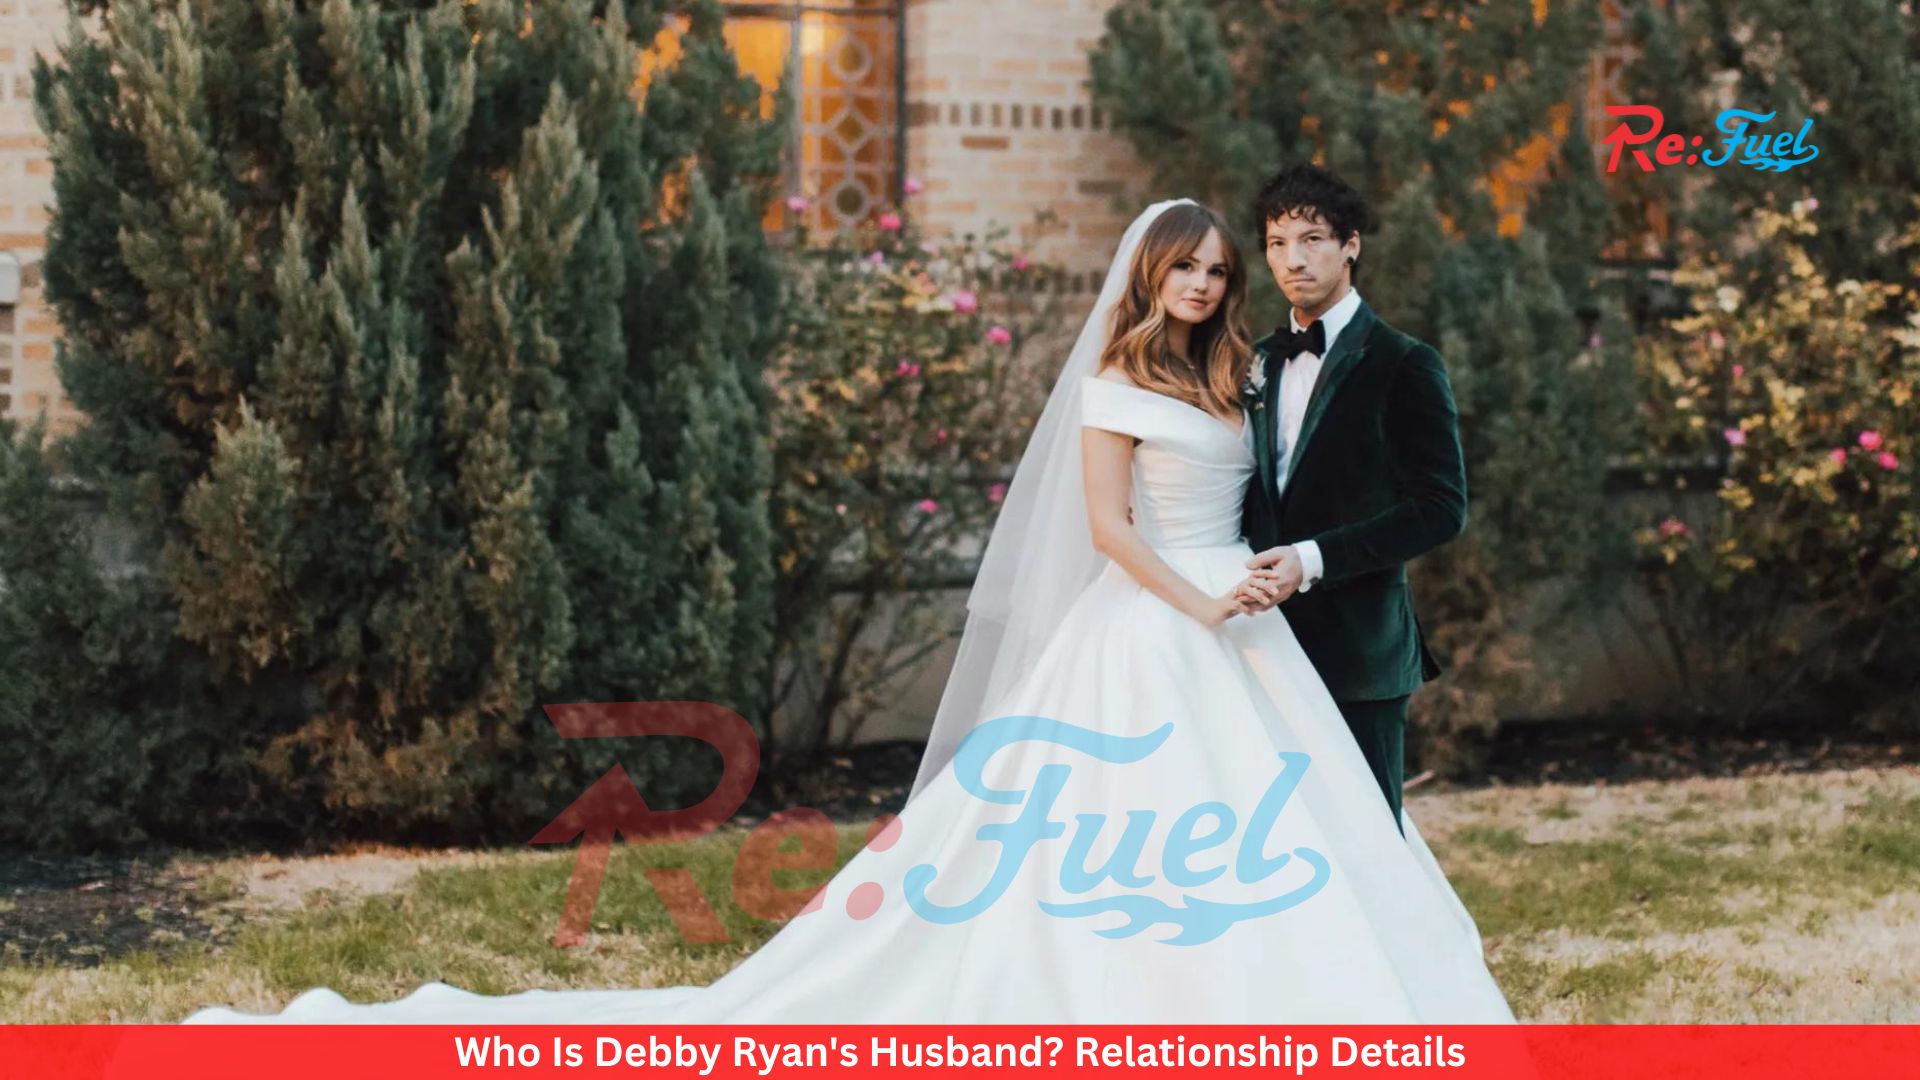 Who Is Debby Ryan's Husband? Relationship Details